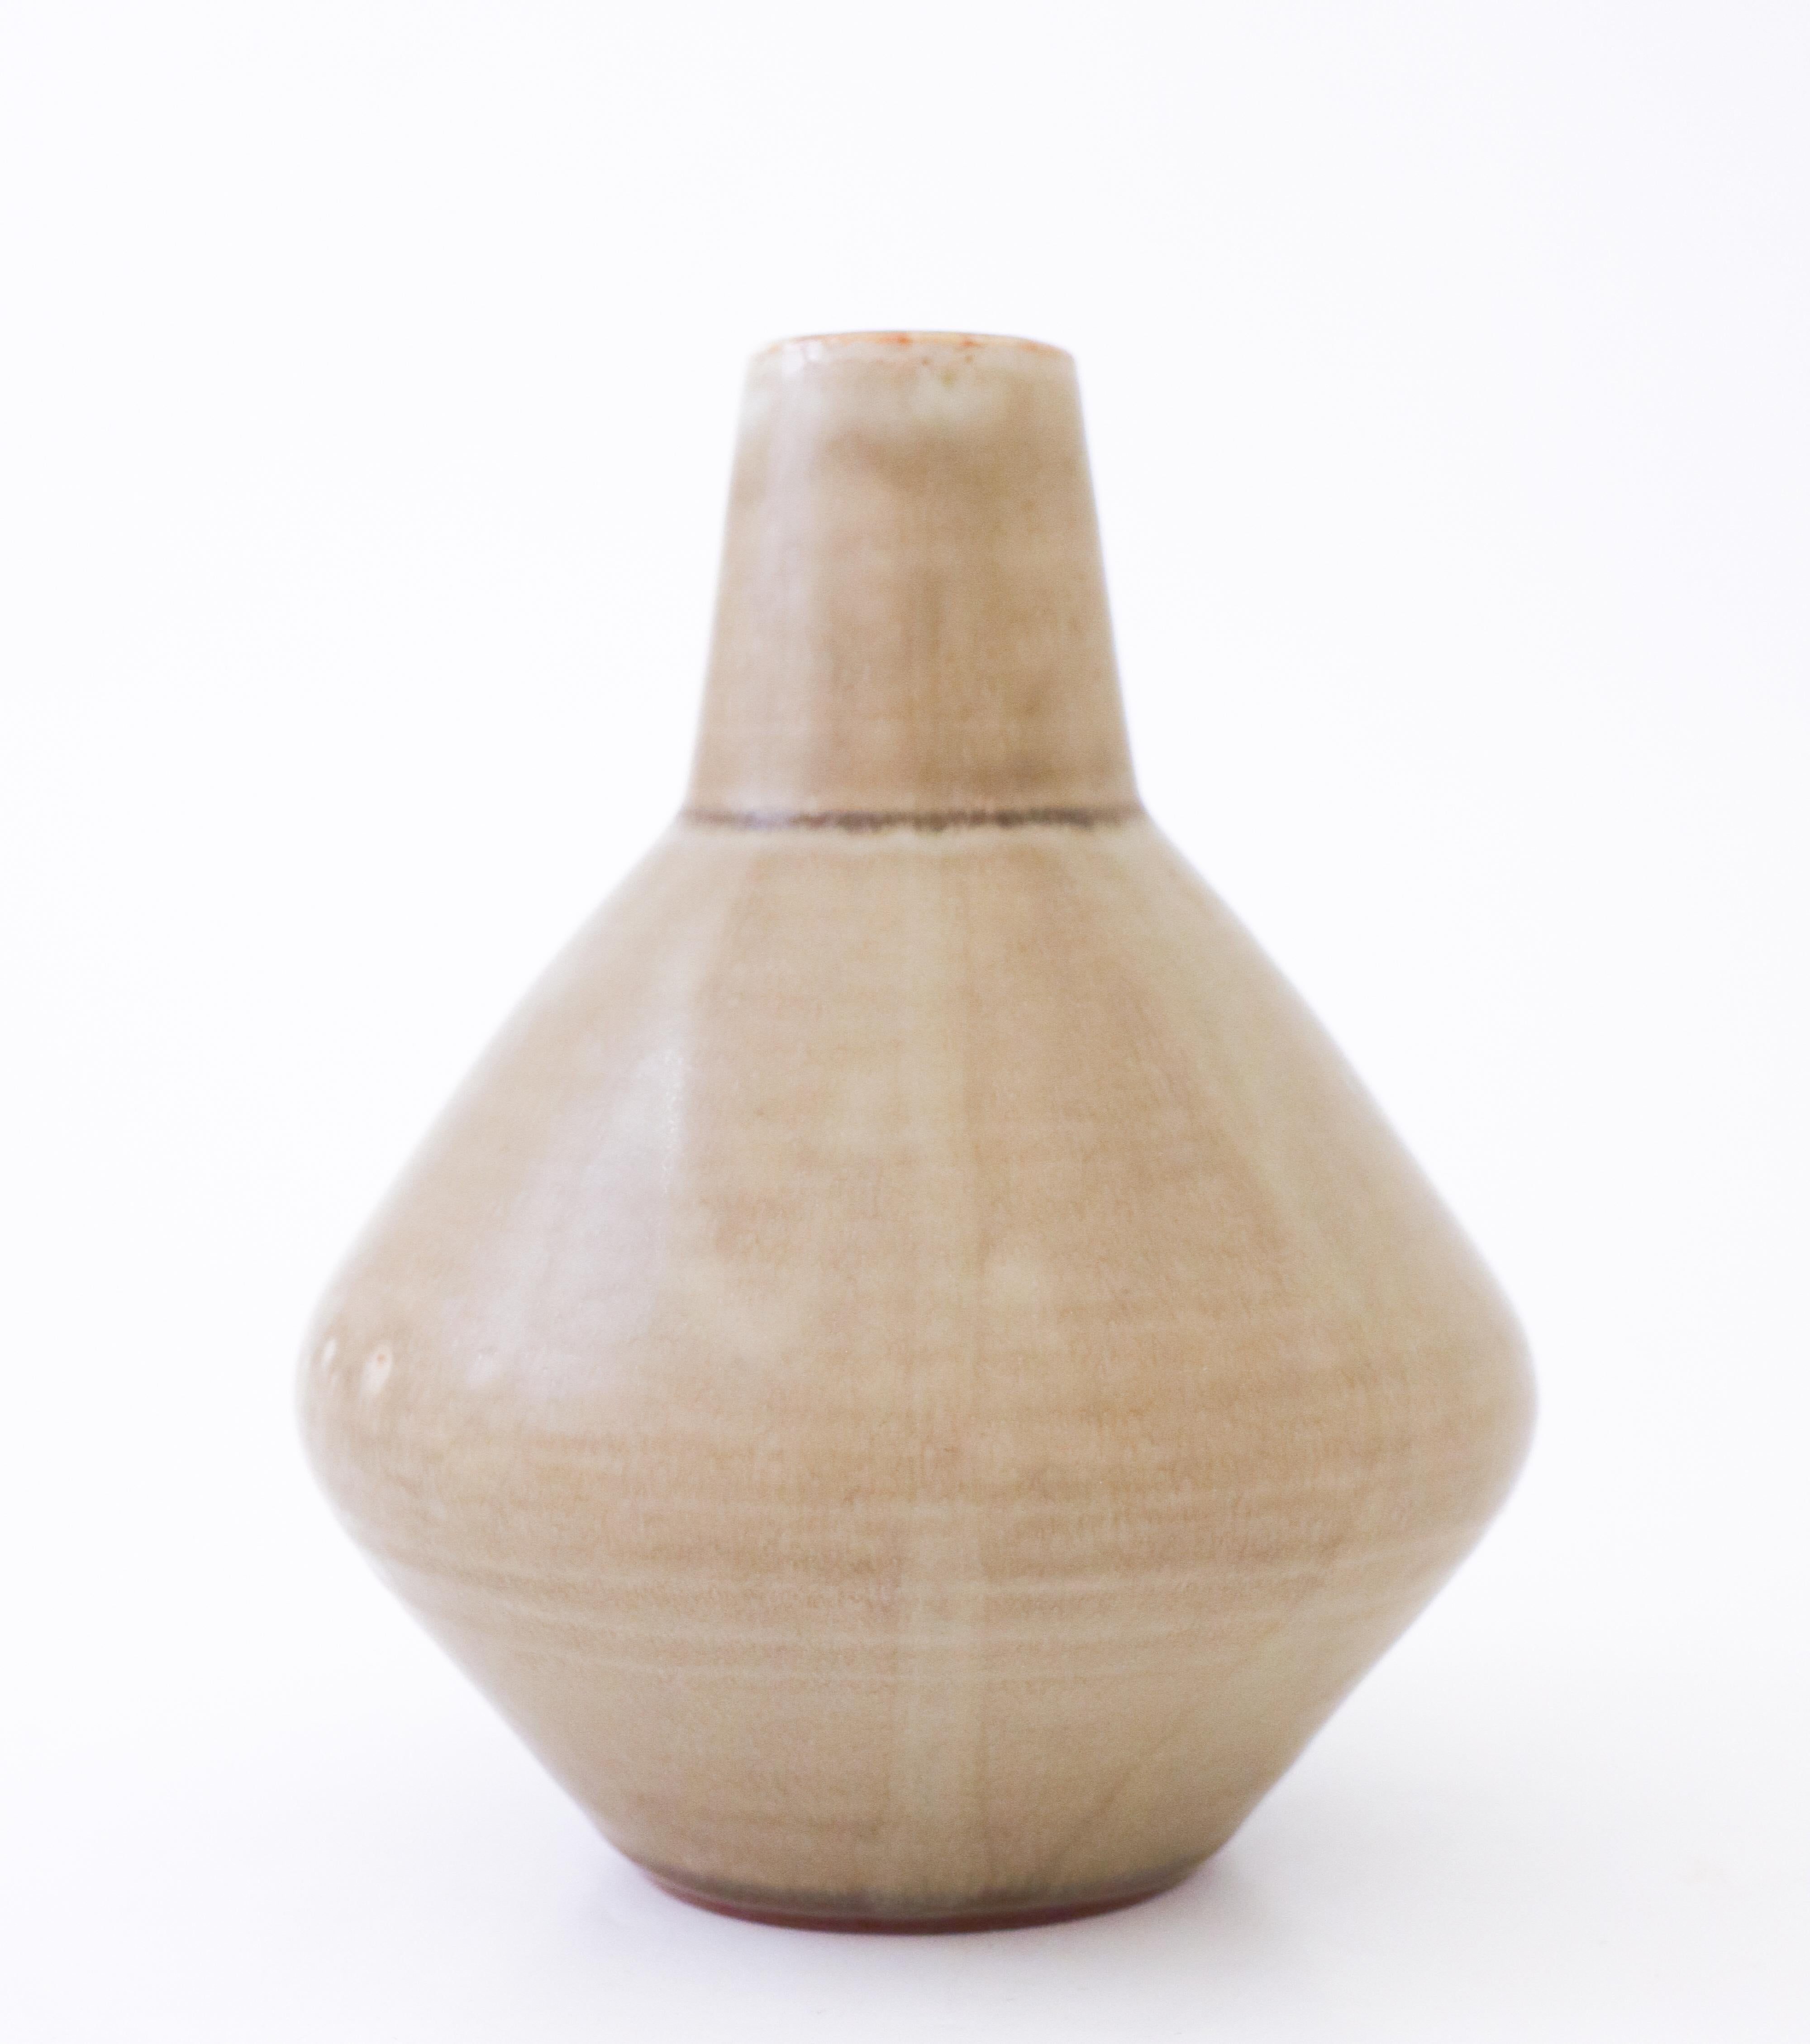 A vase designed by Carl-Harry Stålhane at Rörstrand, it´s 17 cm high and it´s in very good condition except from some minor marks in the glaze from the production. It´s dated 1957 and it is a unique vase.
   